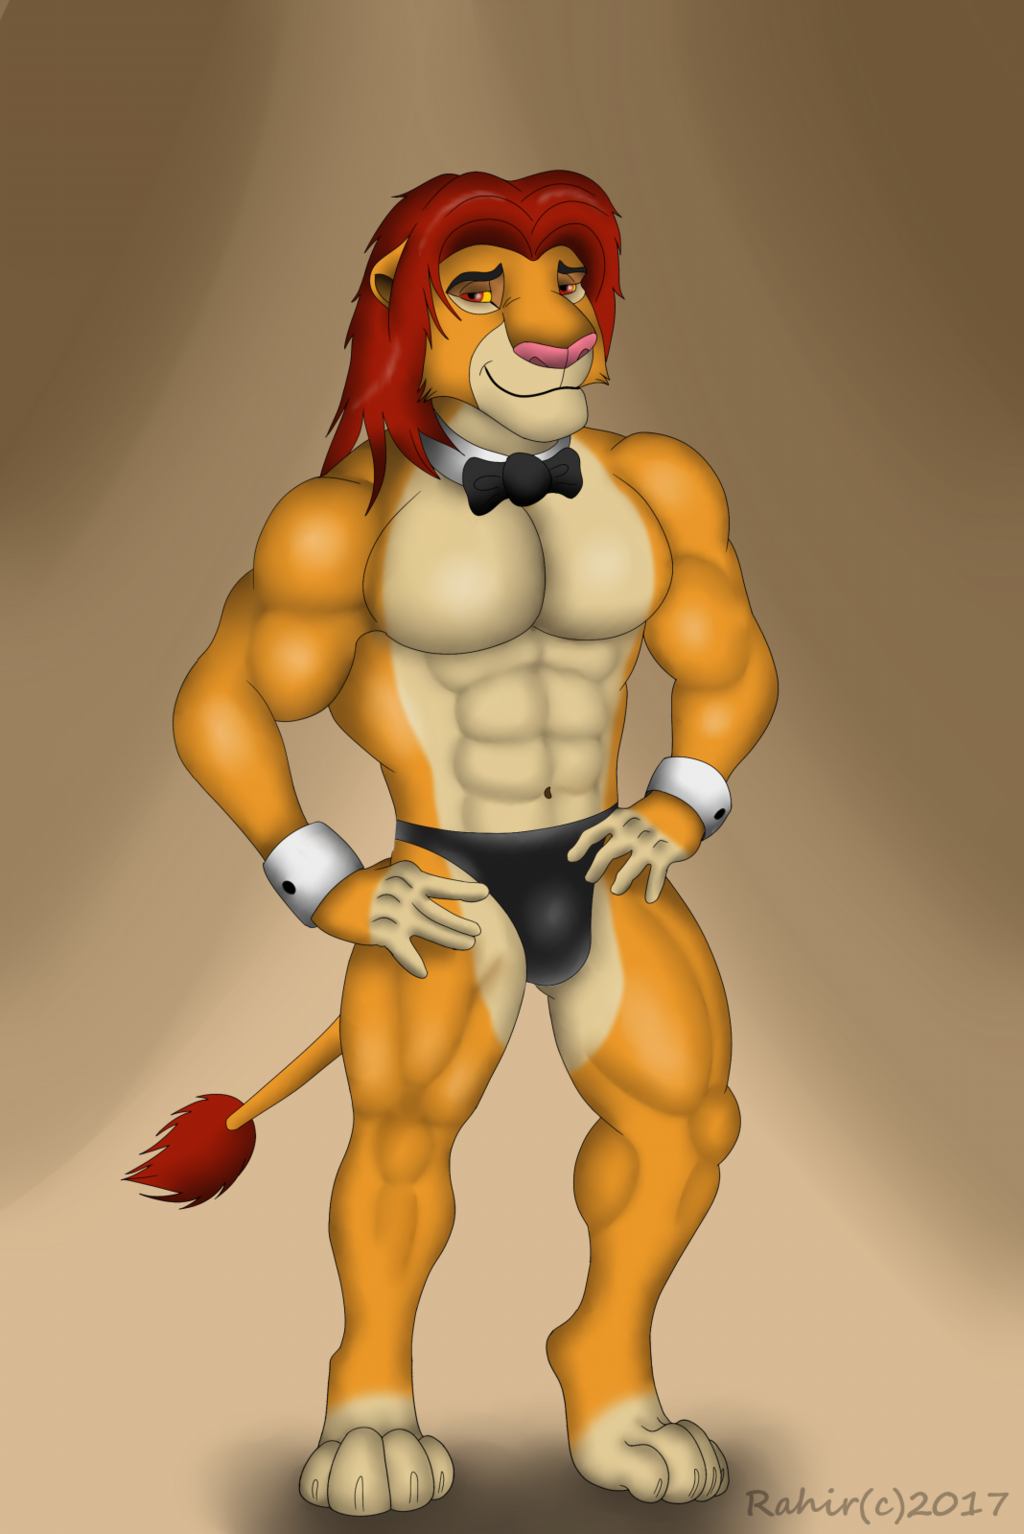 Simba in Chippendales outfit Vers. 2 of 4